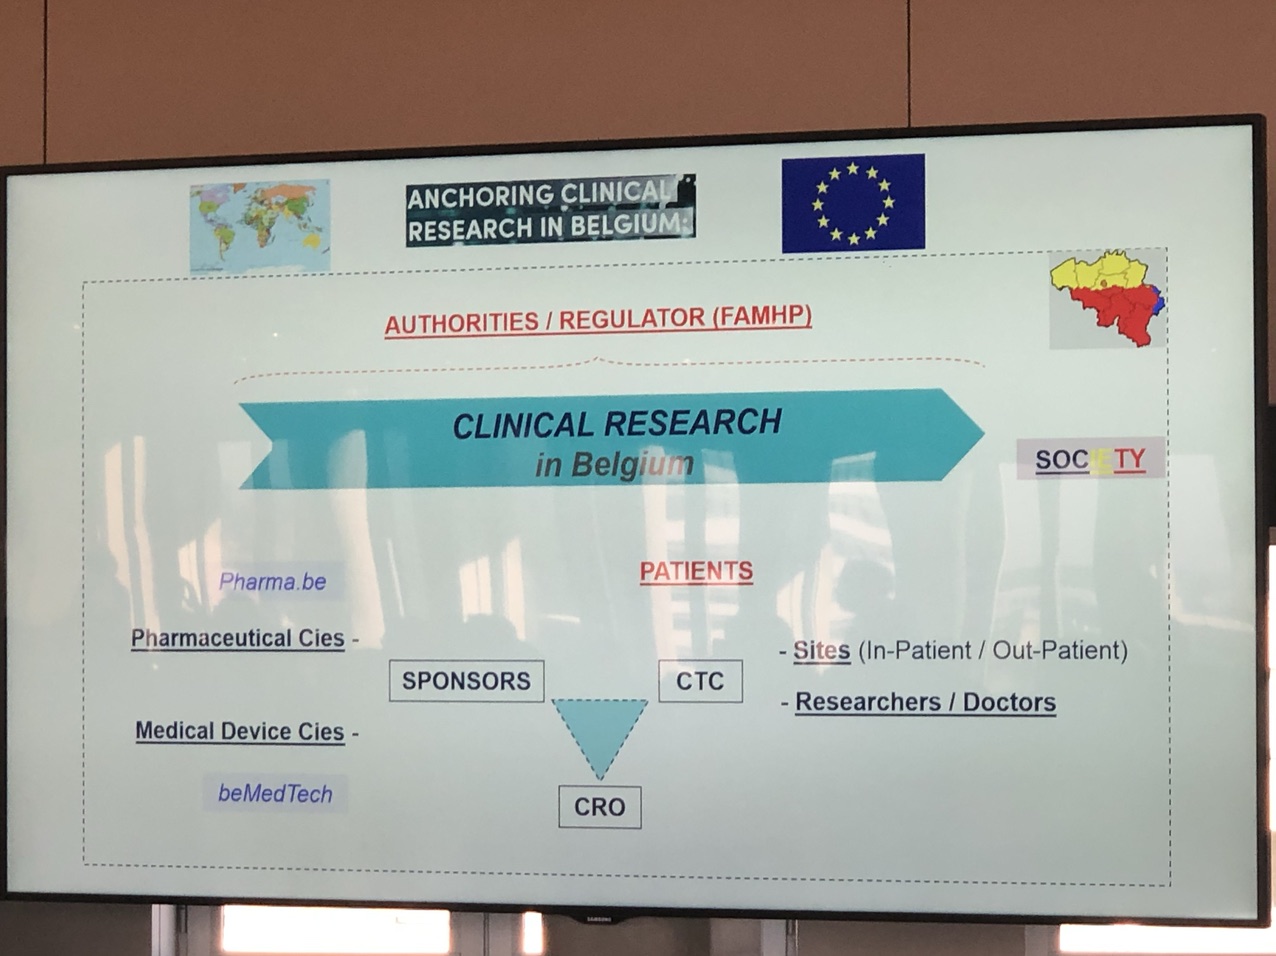 Anchoring clinical Research in Belgium conference